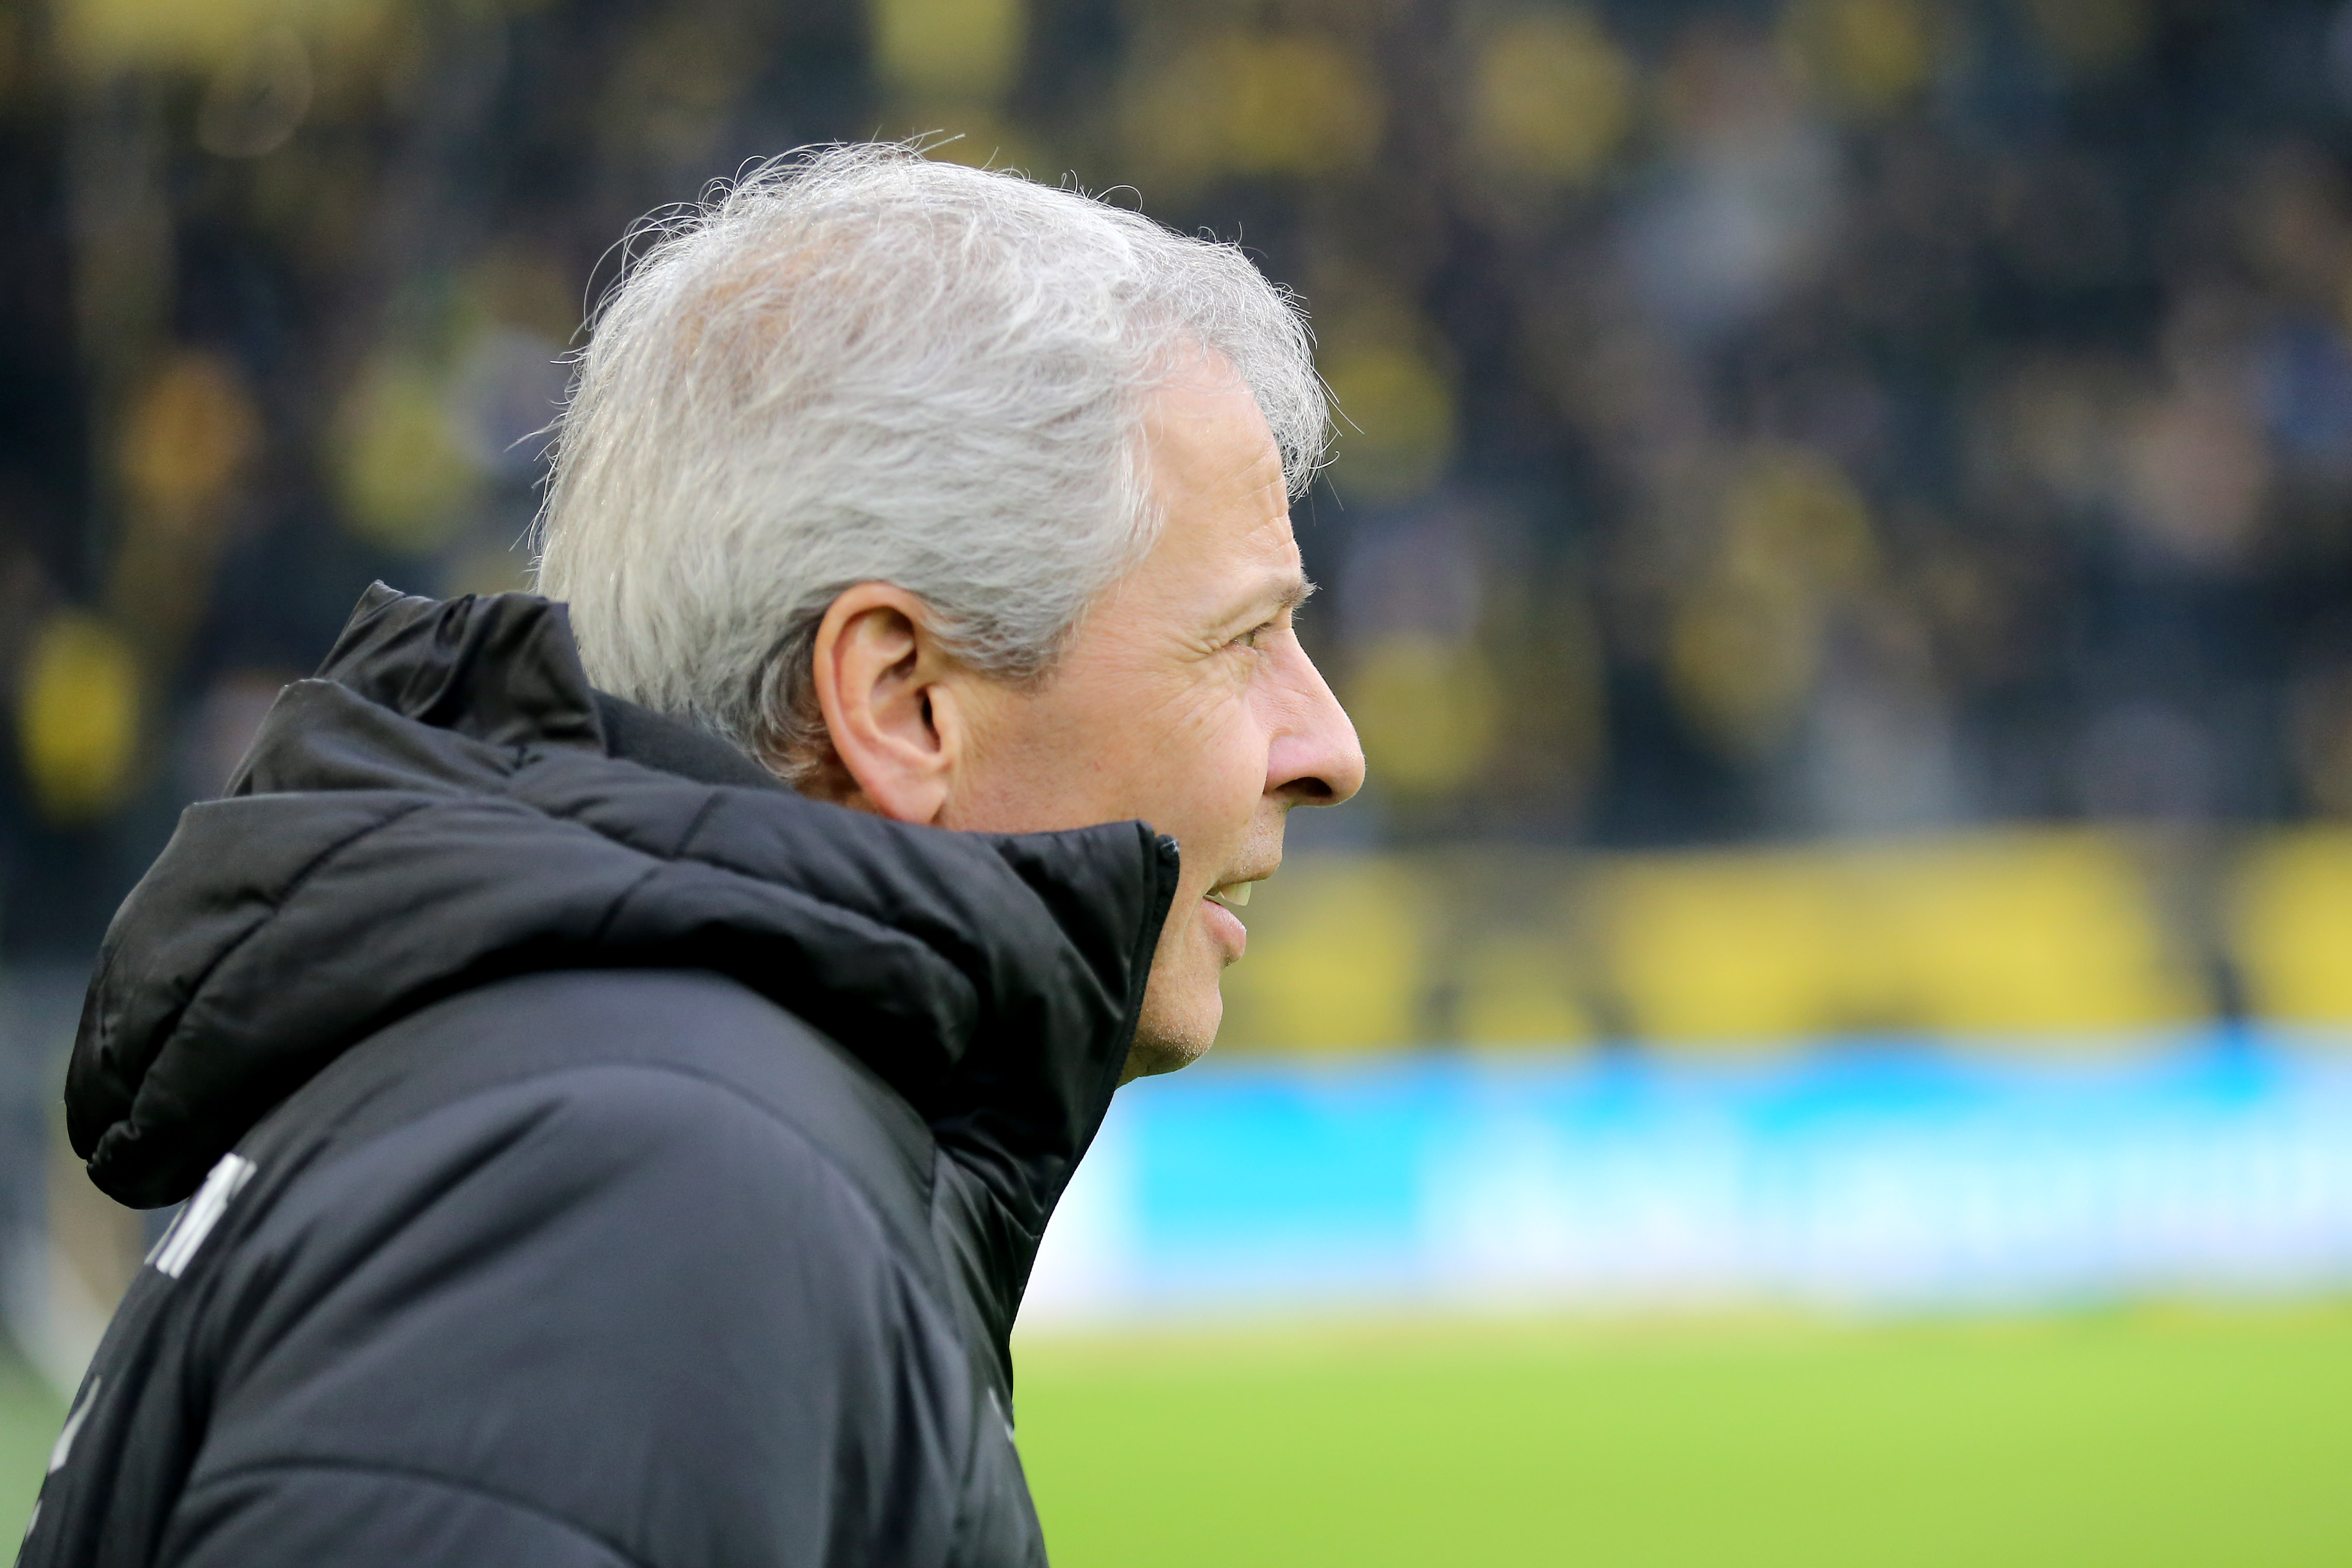 DORTMUND, GERMANY - JANUARY 26: Head coach Lucien Favre of Dortmund looks on prior to the Bundesliga match between Borussia Dortmund and Hannover 96 at Signal Iduna Park on January 26, 2019 in Dortmund, Germany. (Photo by Christof Koepsel/Bongarts/Getty Images)